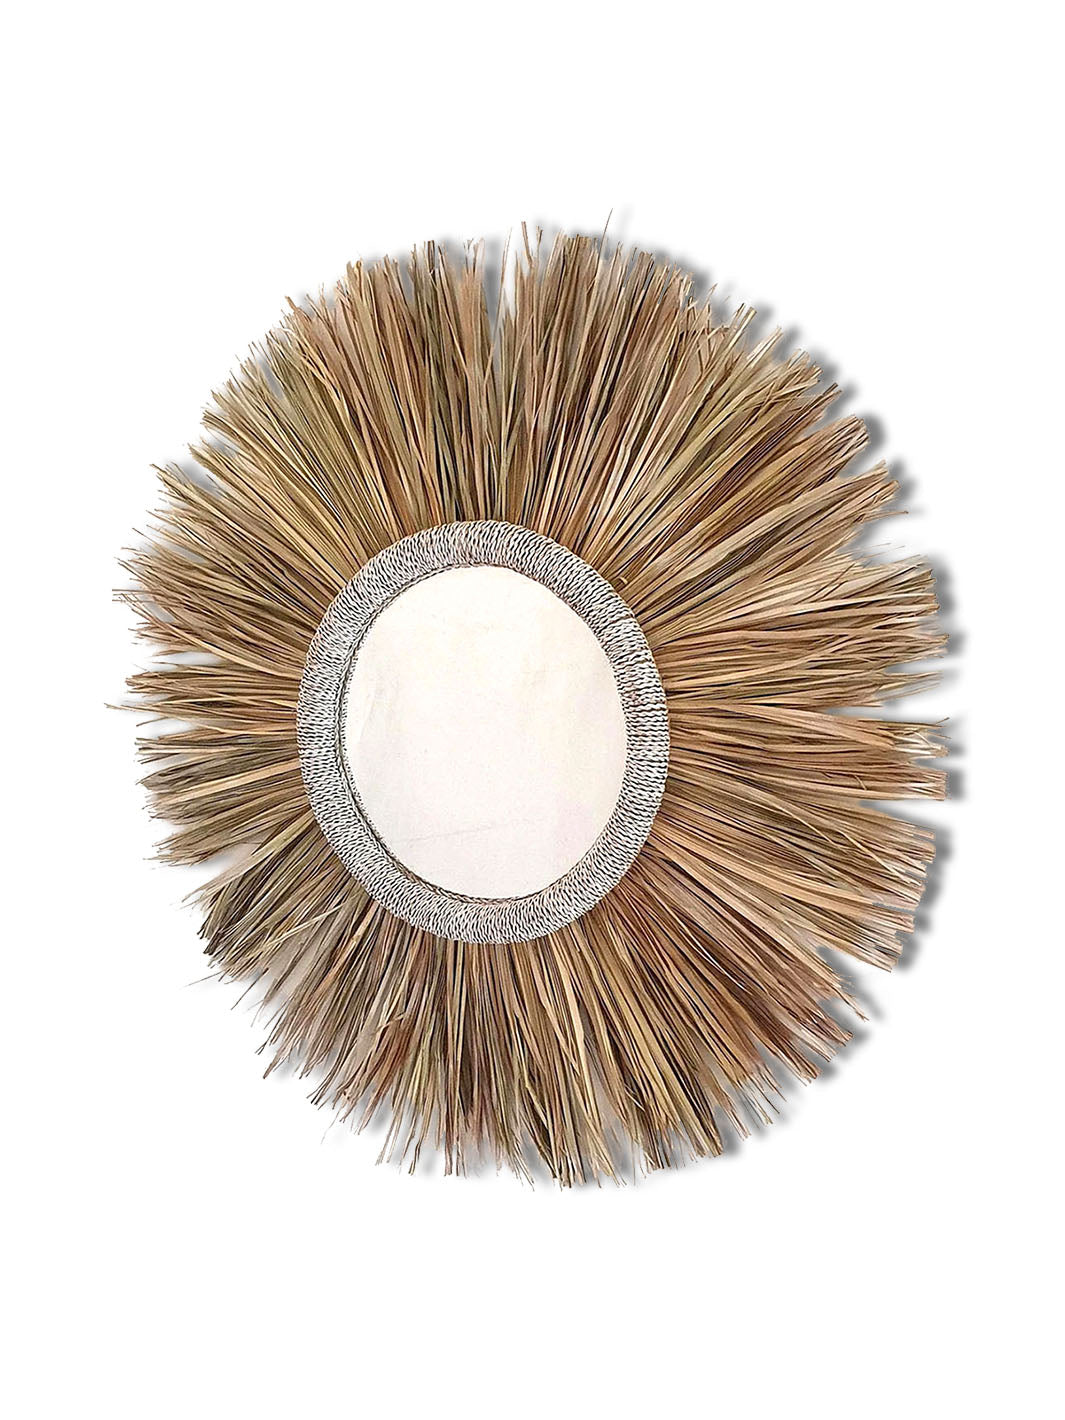 Handcrafted Large Straw Rope Rounded Wall Mirror